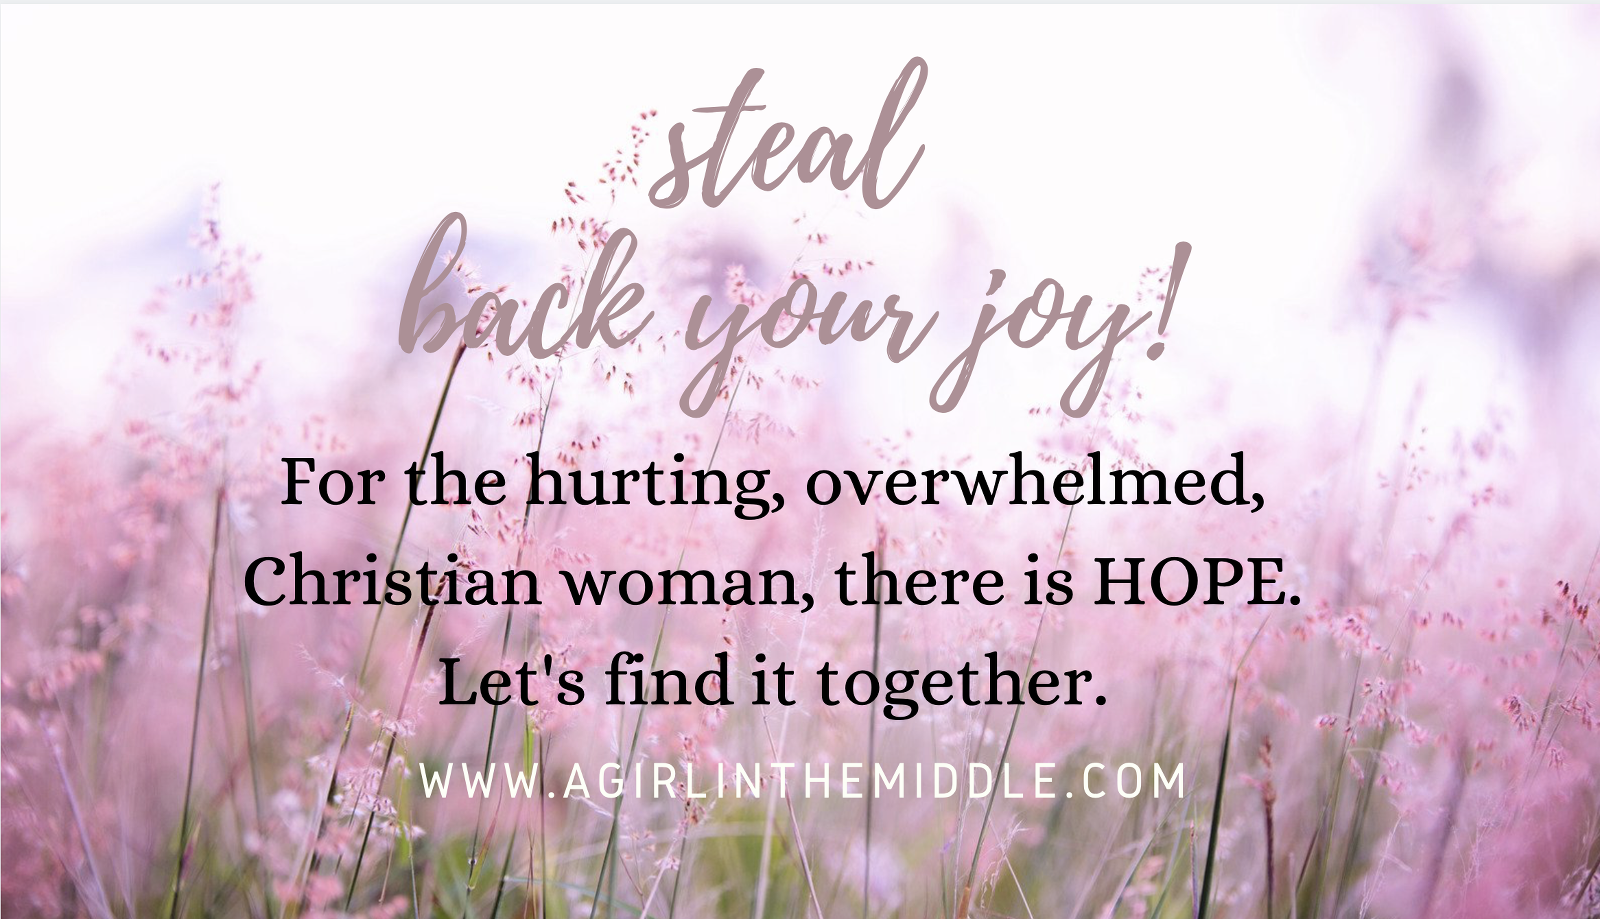 A Woman's Worth; Steal back your joy!